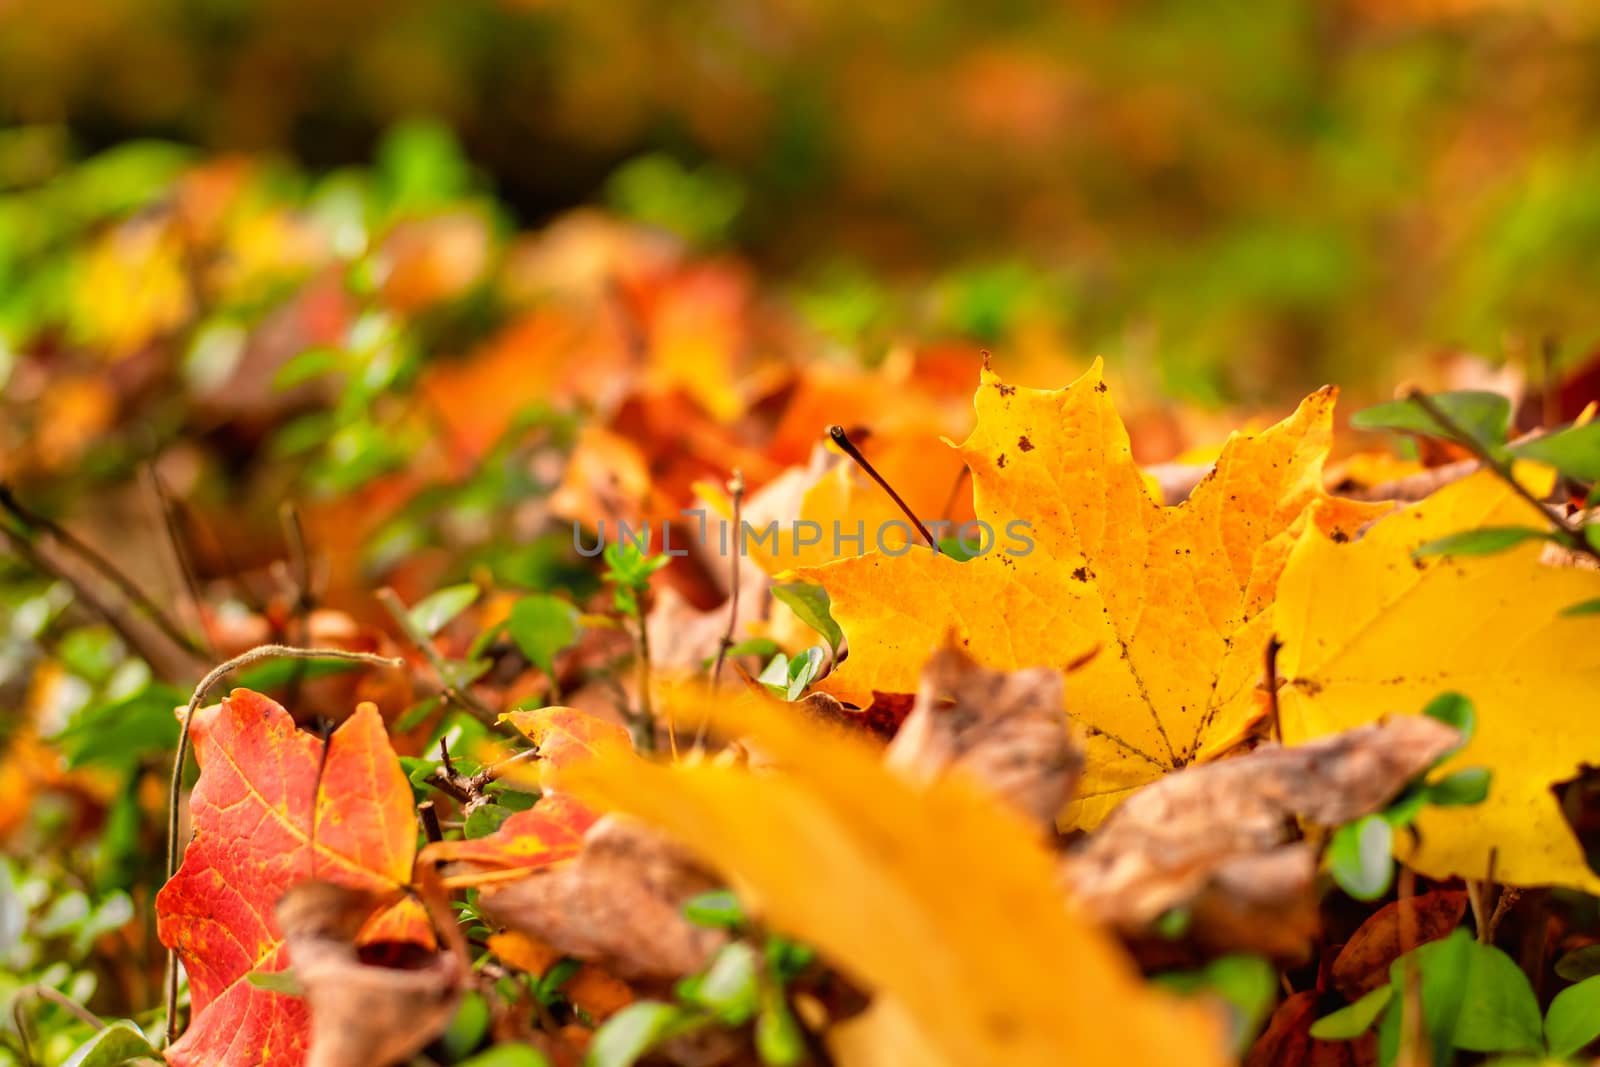 A Bright Yellow Leaf in a Pile of Autumn Leaves by bju12290